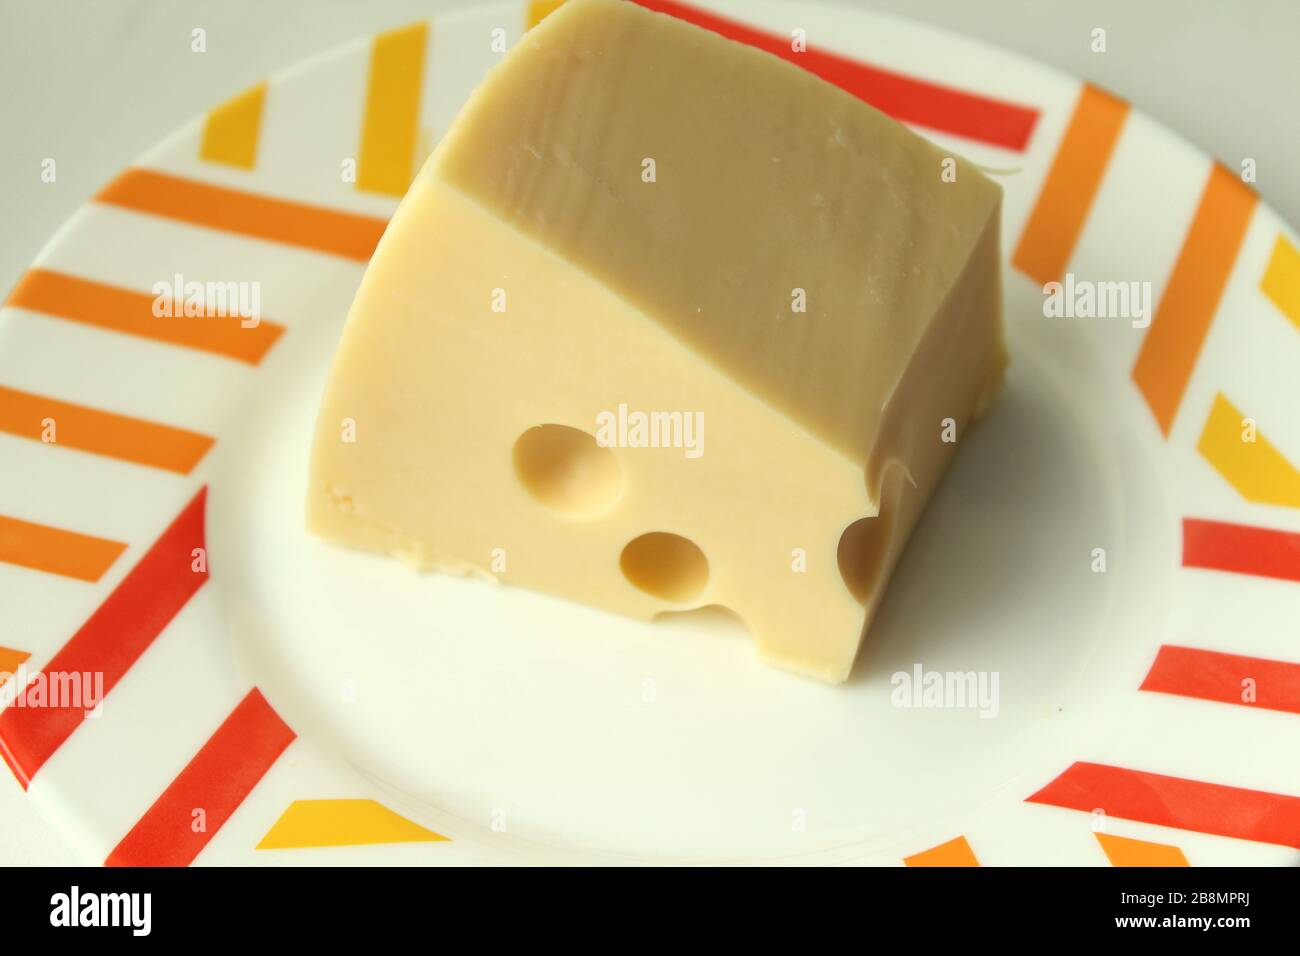 A piece of yellow cheese with holes lies on a white plate with a colored edge. Stock Photo